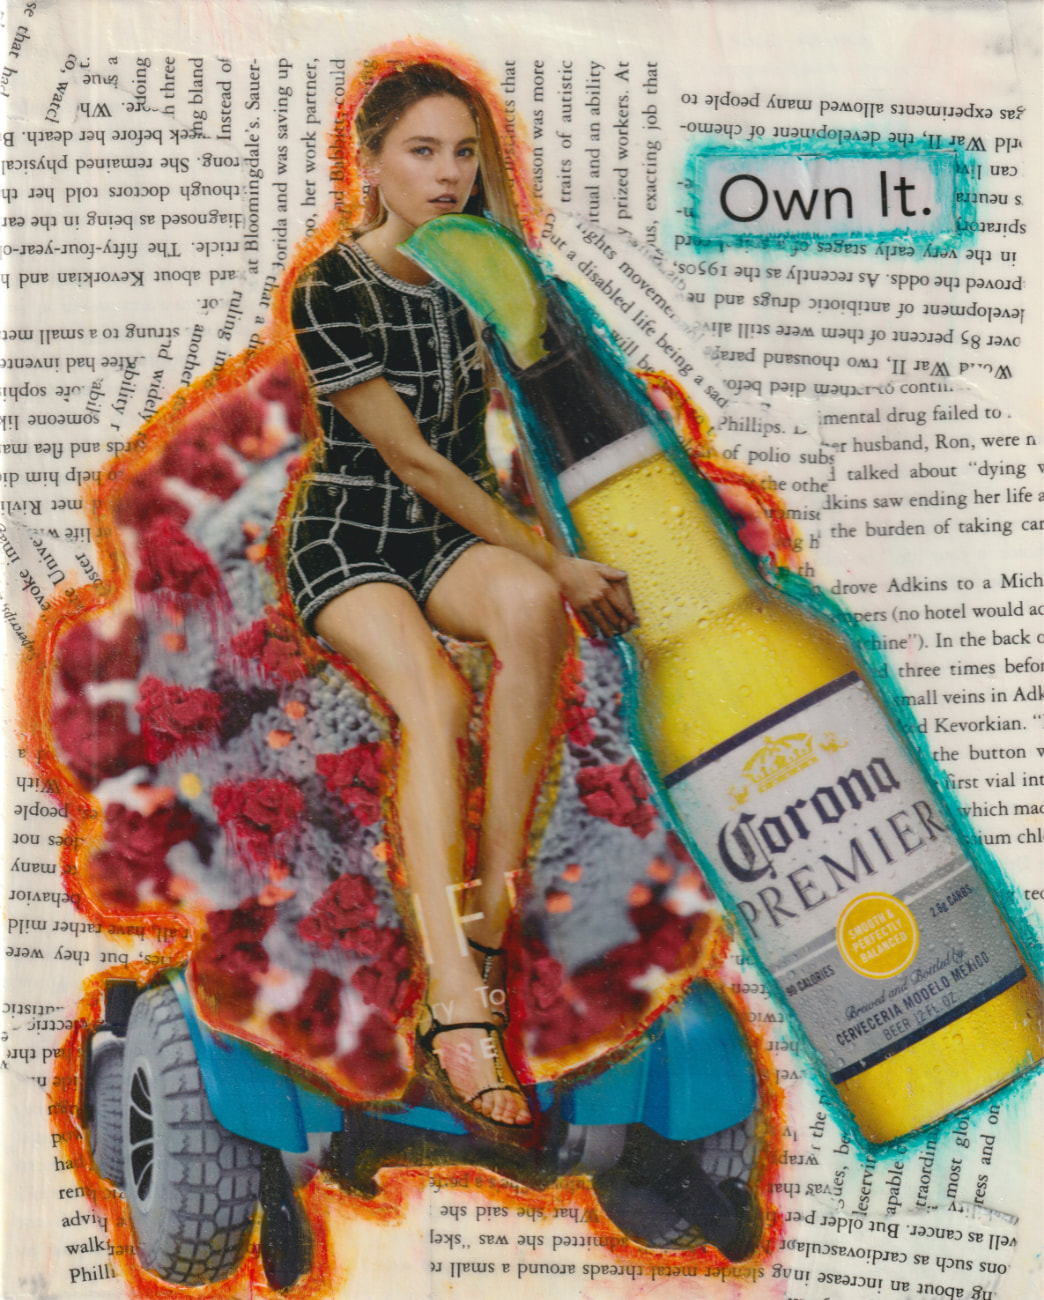 A collage of a pale-skinned woman with long dark blonde hair wearing a black and white plaid romper. She is seated on a large crocheted doily on top of a power wheelchair base, and holds a bottle of Corona beer that is as large as she is. In the background is mixed small text and outlined in green are the words Own It. the